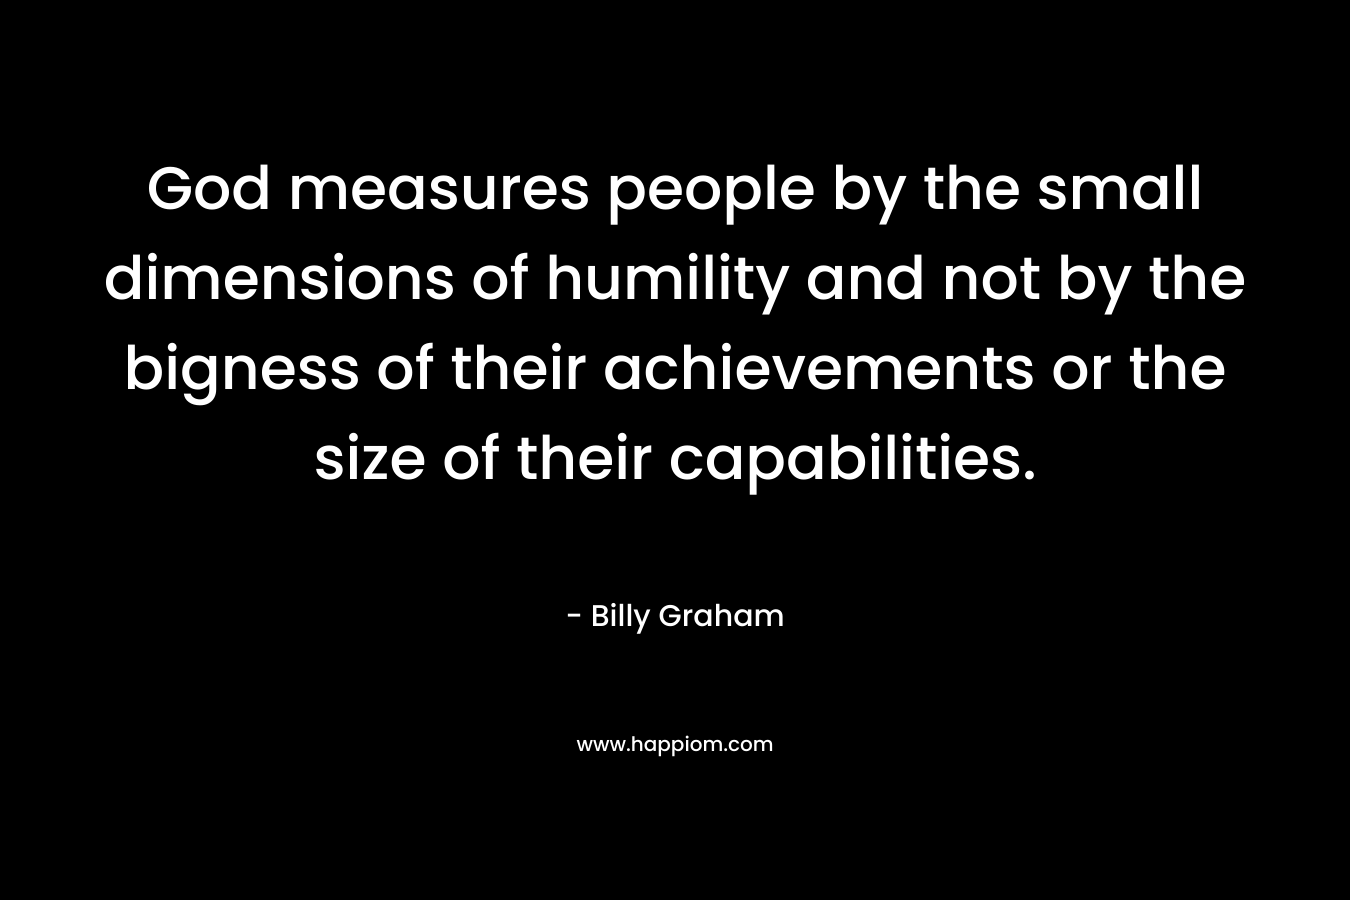 God measures people by the small dimensions of humility and not by the bigness of their achievements or the size of their capabilities.